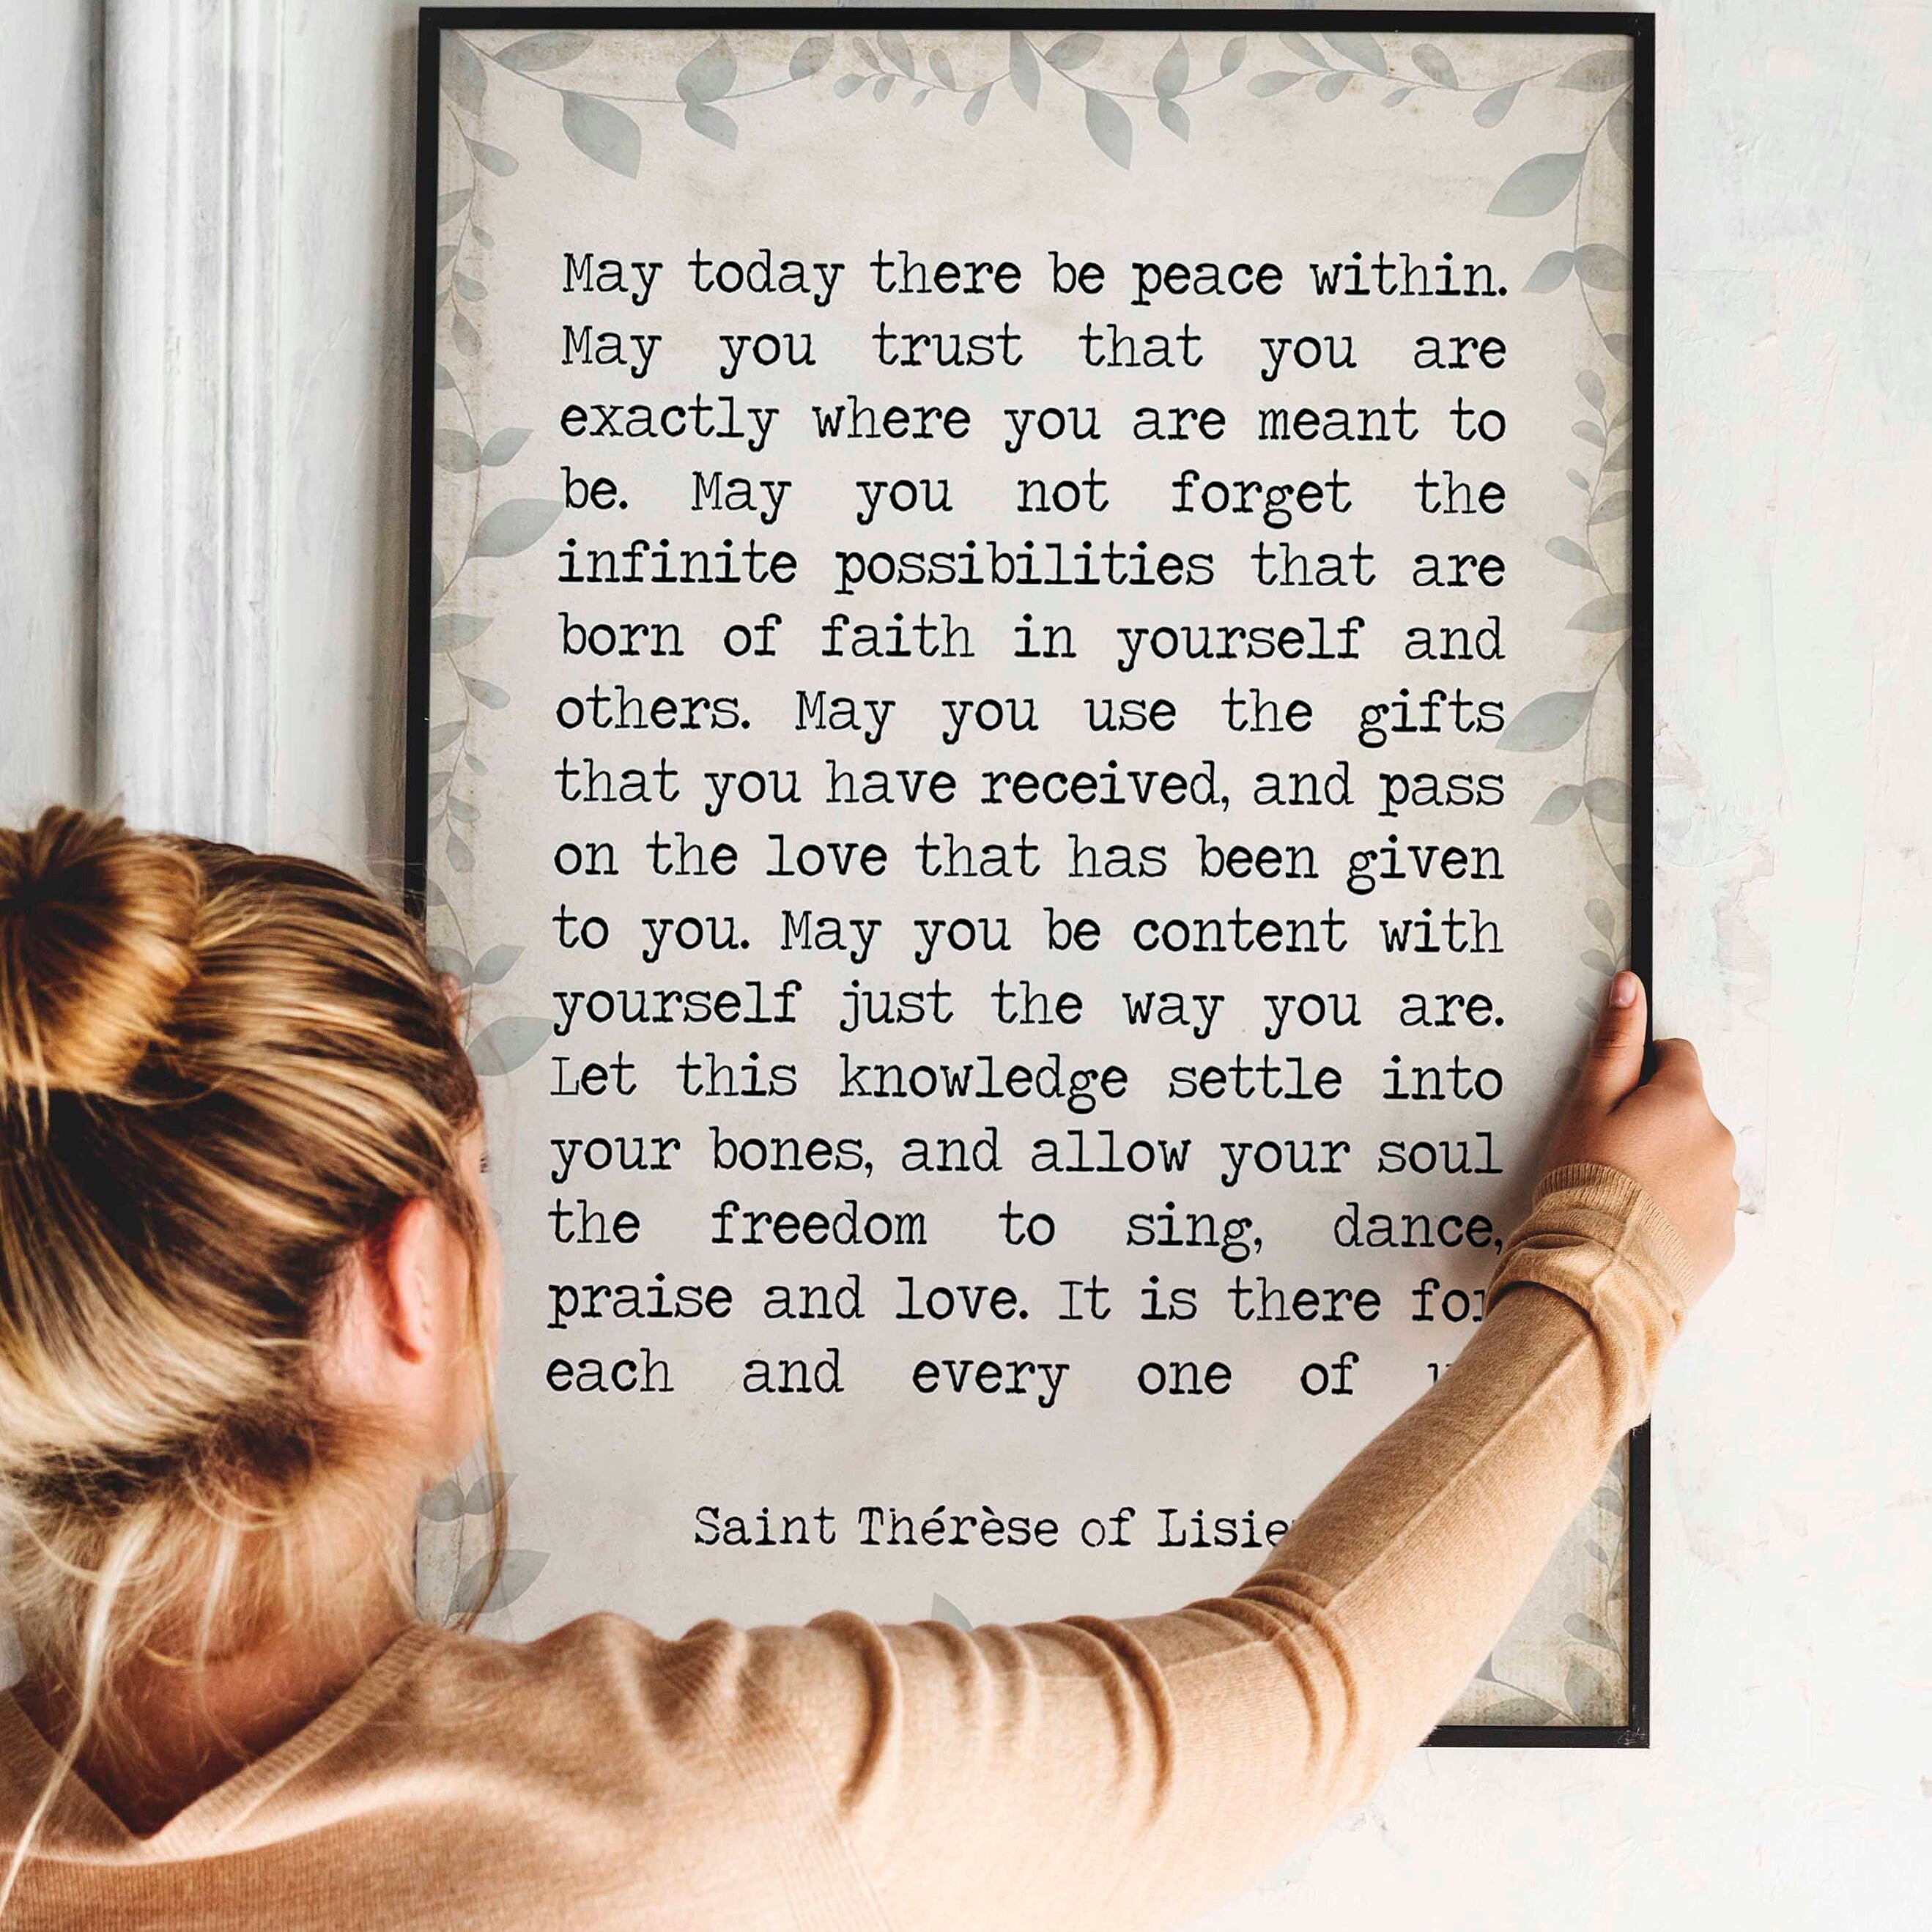 St Therese of Lisieux Peace Quote Print, May Today There Be Peace Within Inspirational Quote Wall Art Print